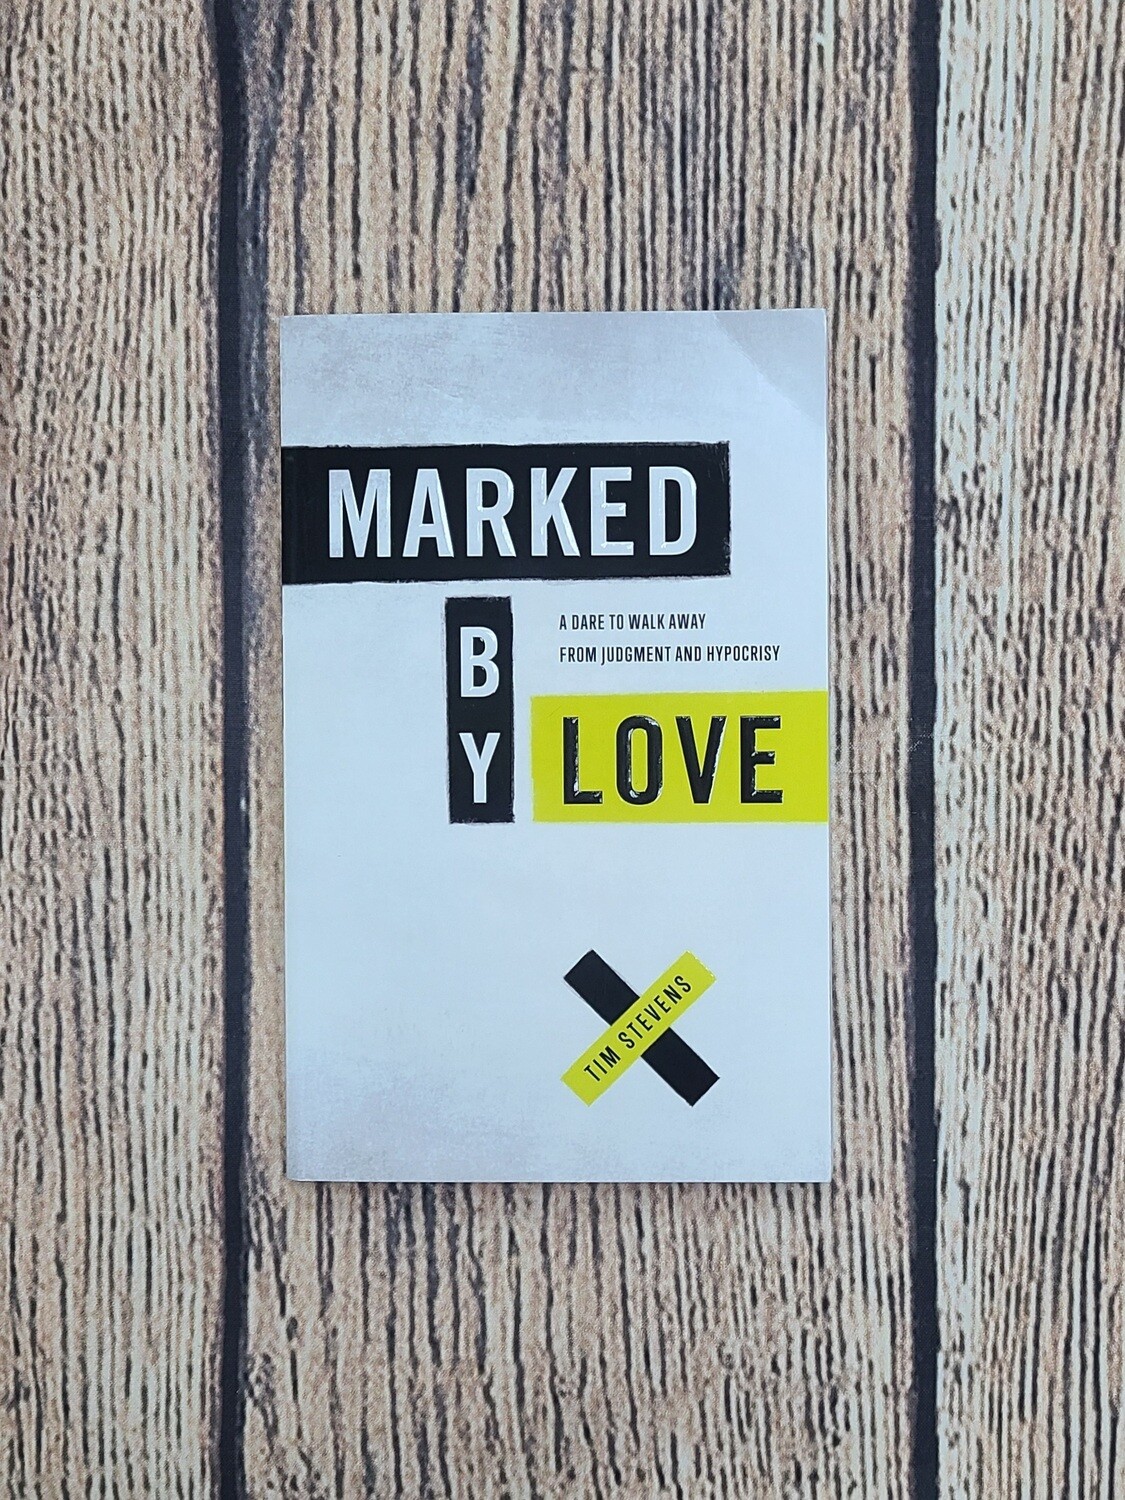 Marked by Love by Tim Stevens